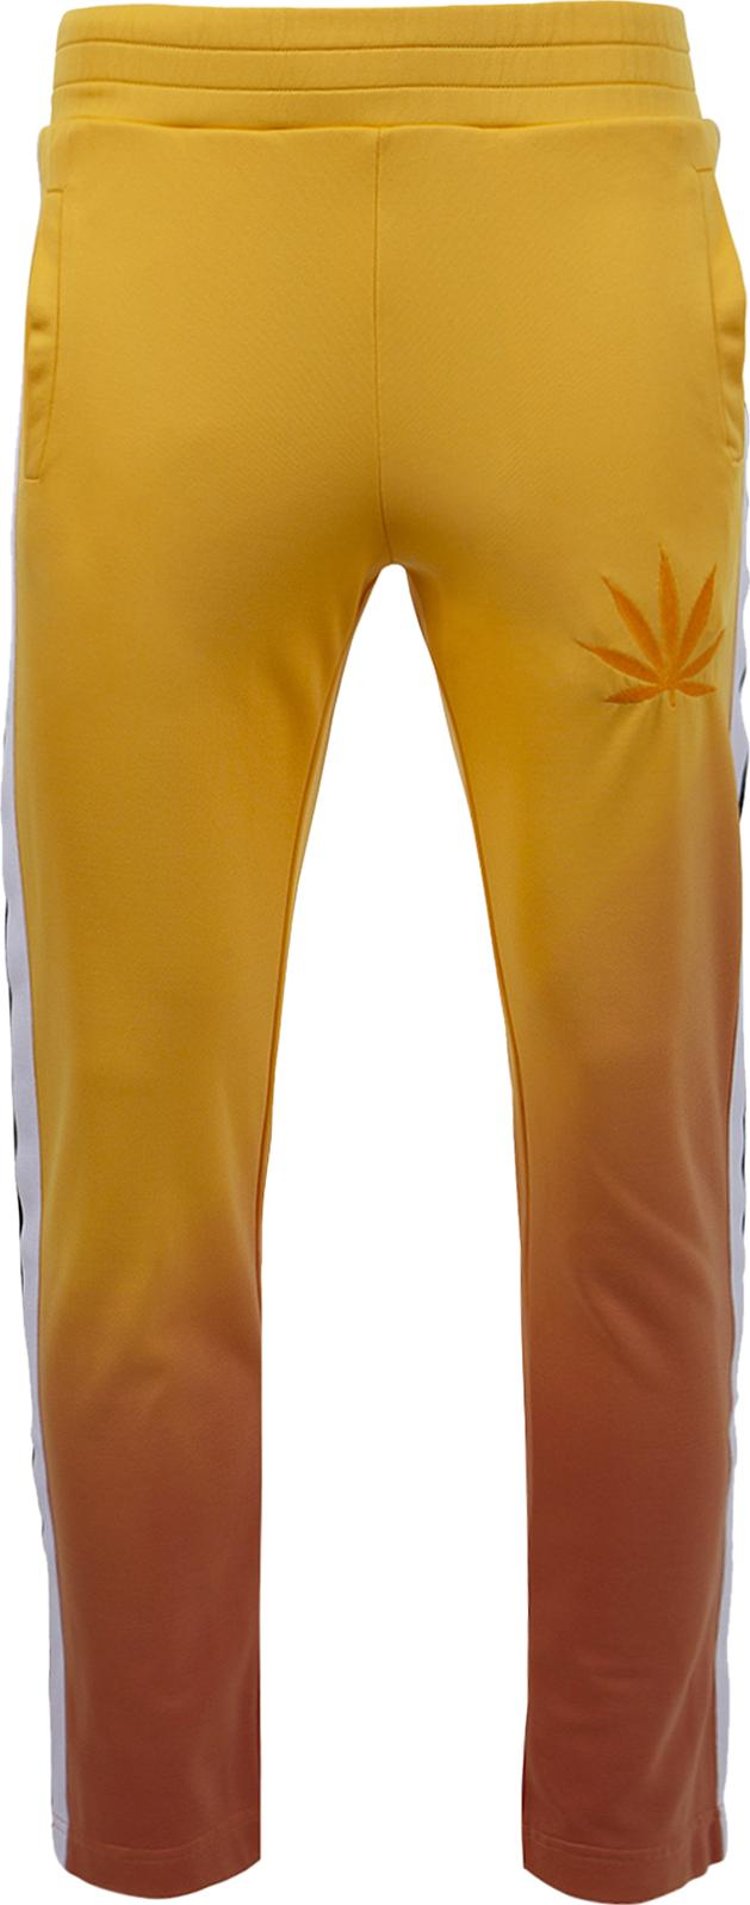 Palm Angels x The Webster Degrade Track Pants 'Red/Yellow/Orange'